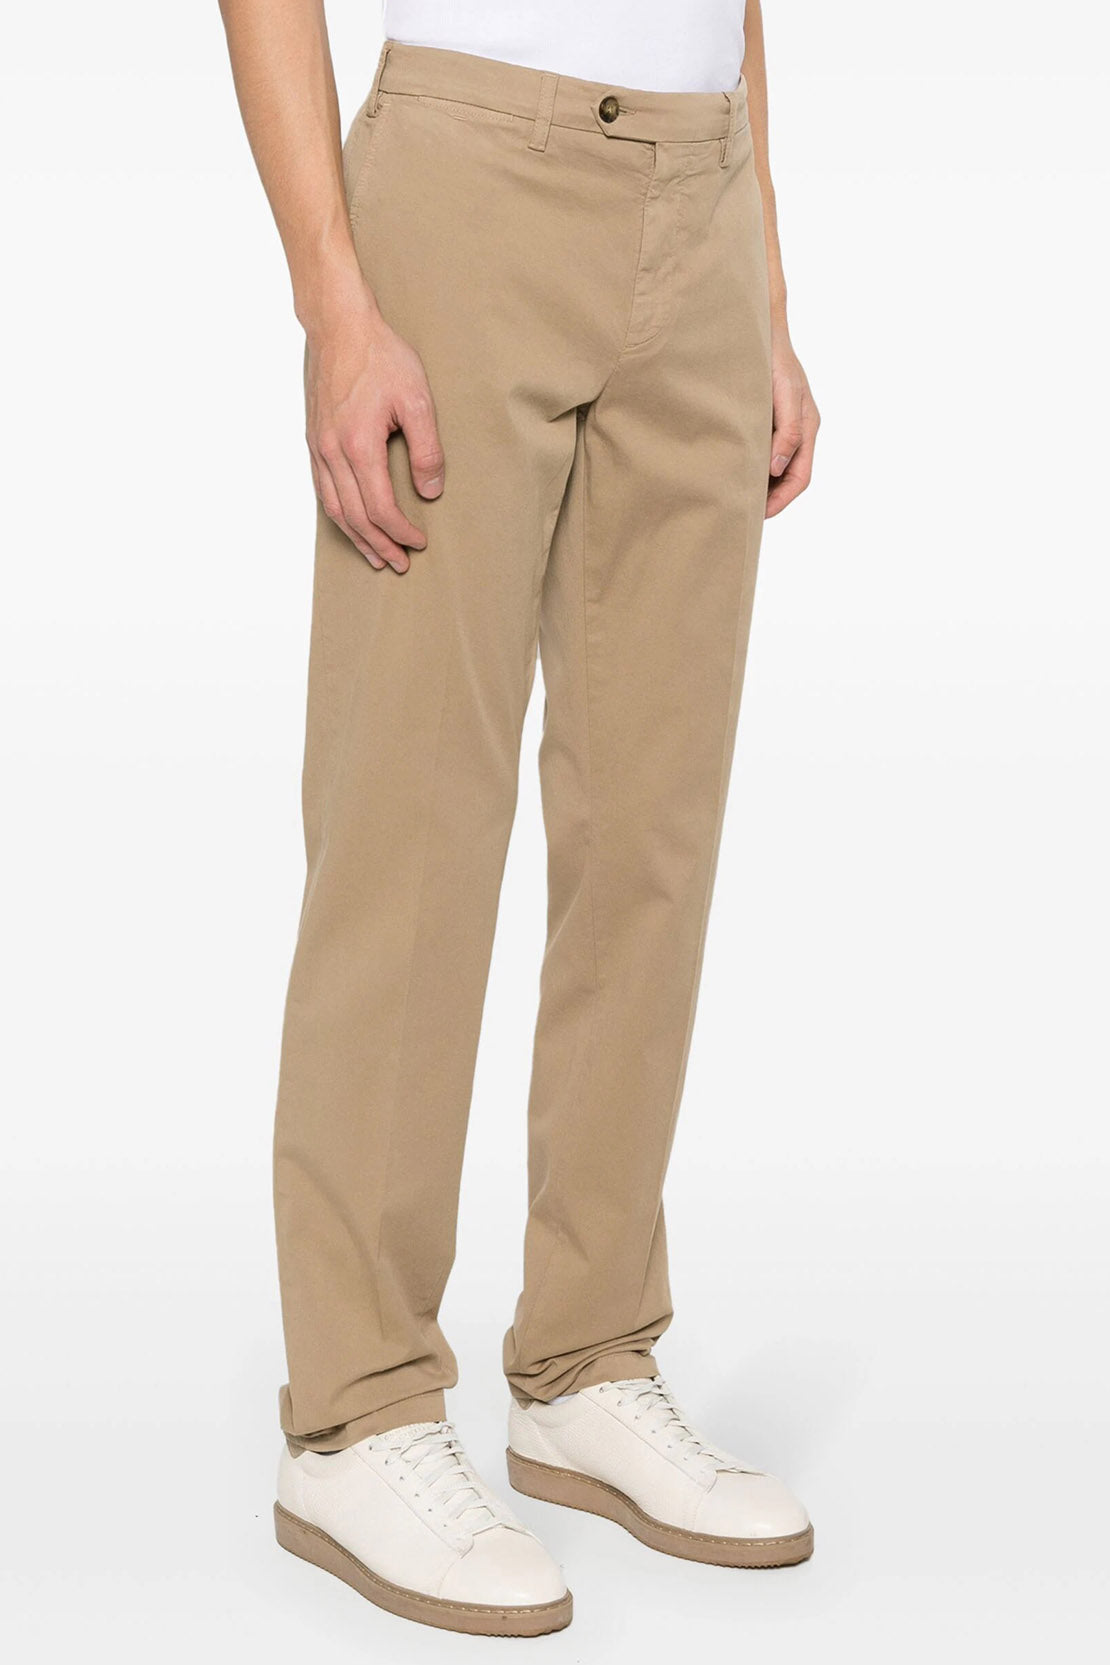 CANALI - Beige Chinos In Garment Dyed Cotton Microtwill - 91633-PT00452-726